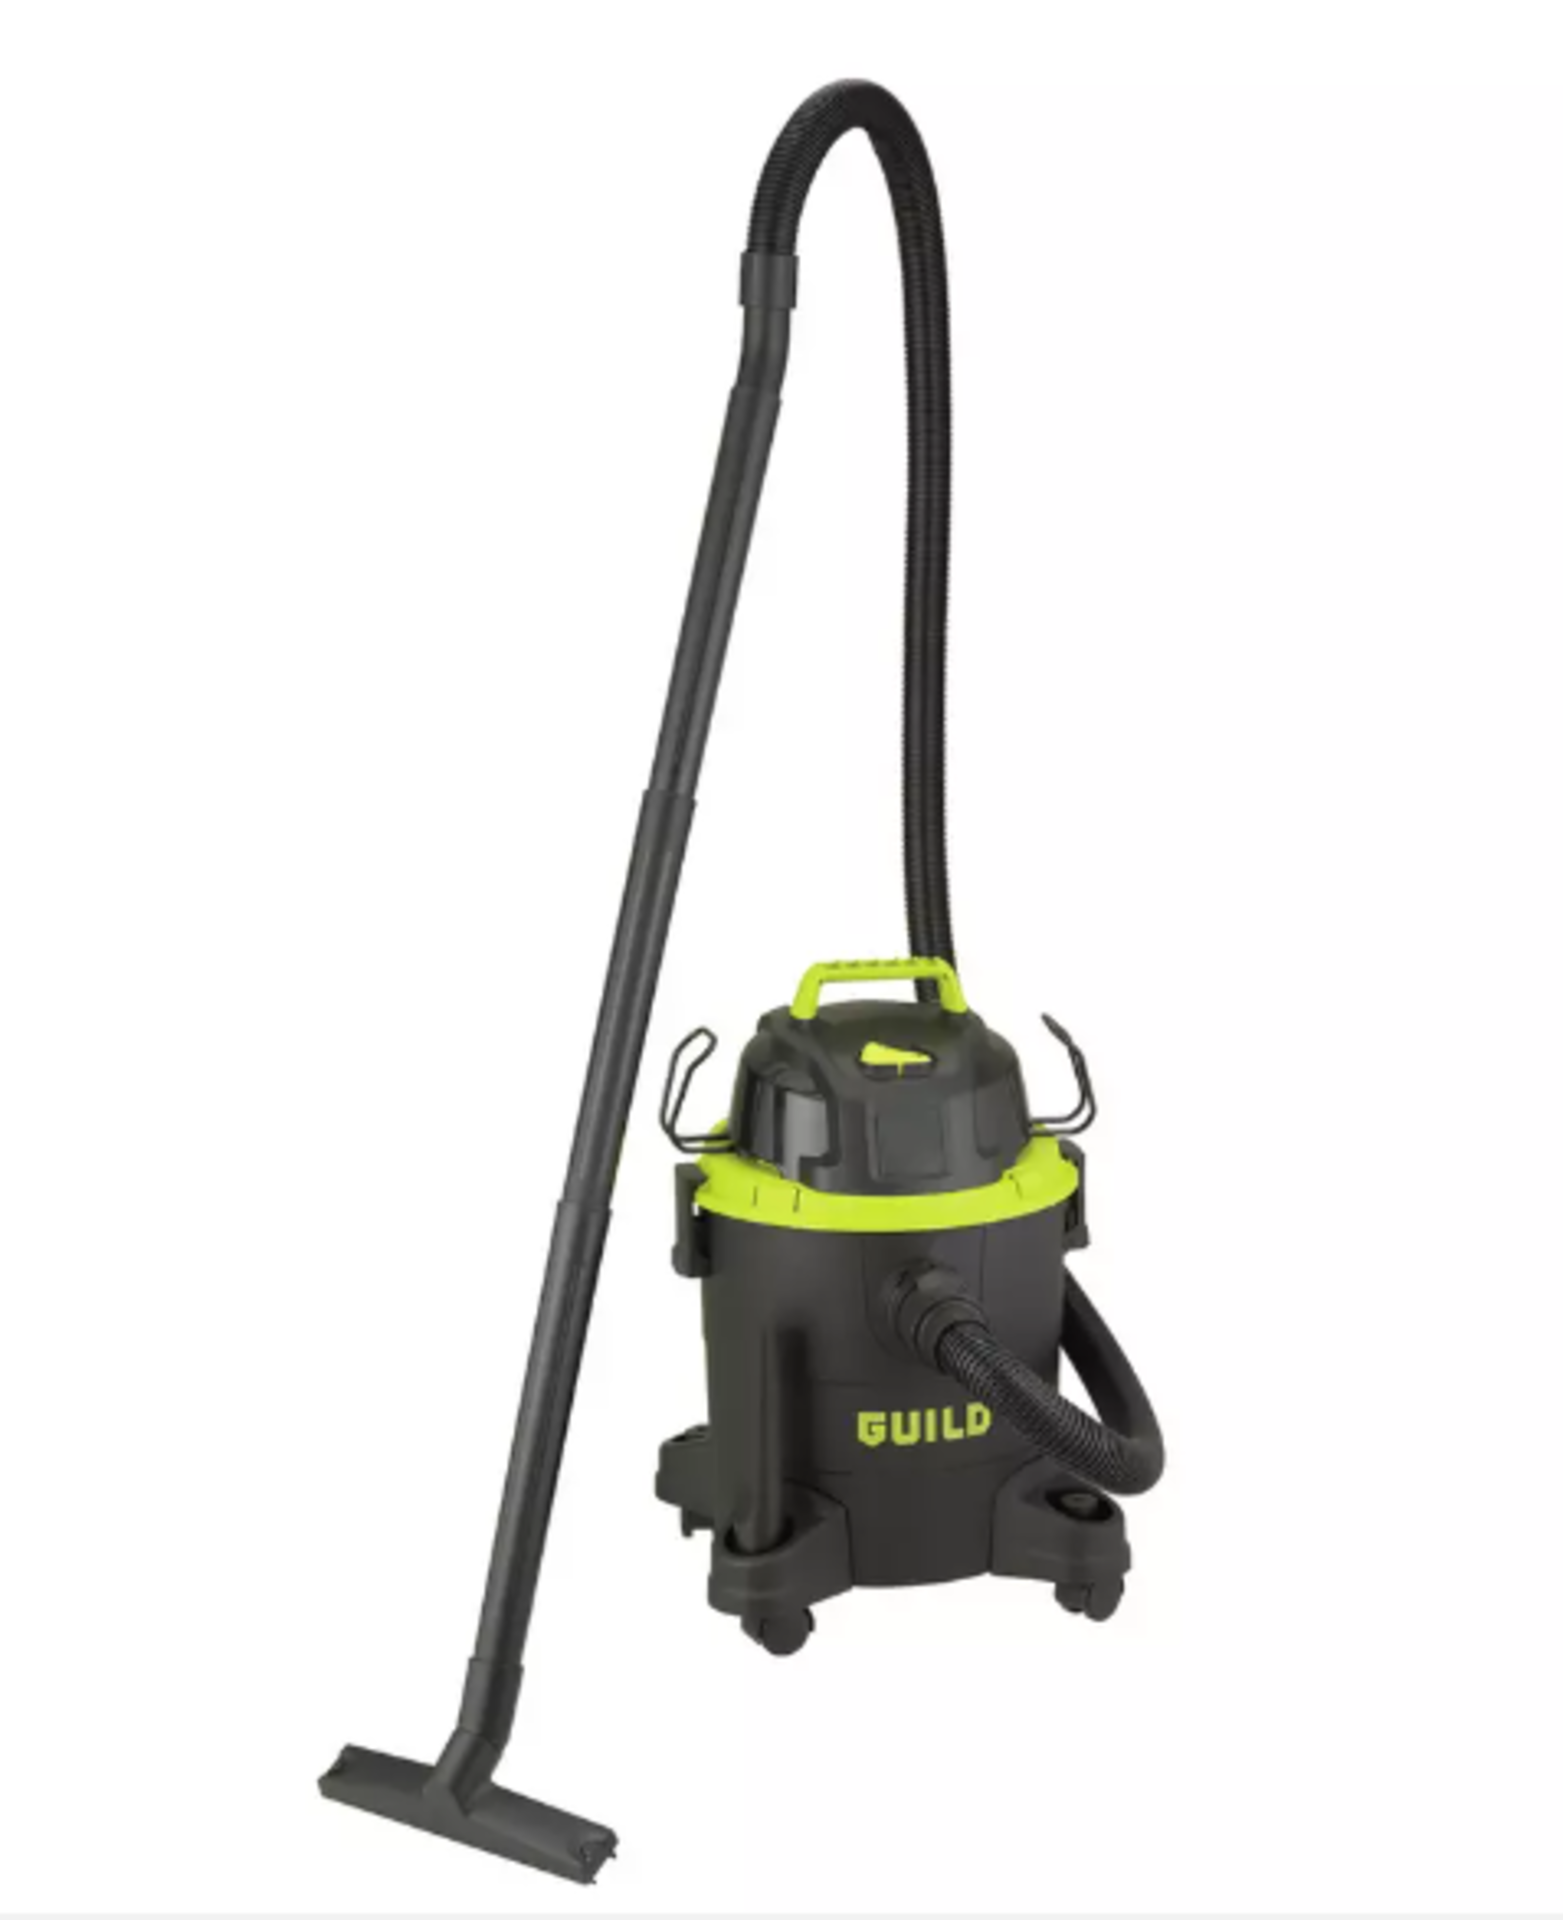 Guild 16 Litre Wet and Dry Vacuum Cleaner - 1300W. - EBR. *boxed* This Guild 1300W wet and dry